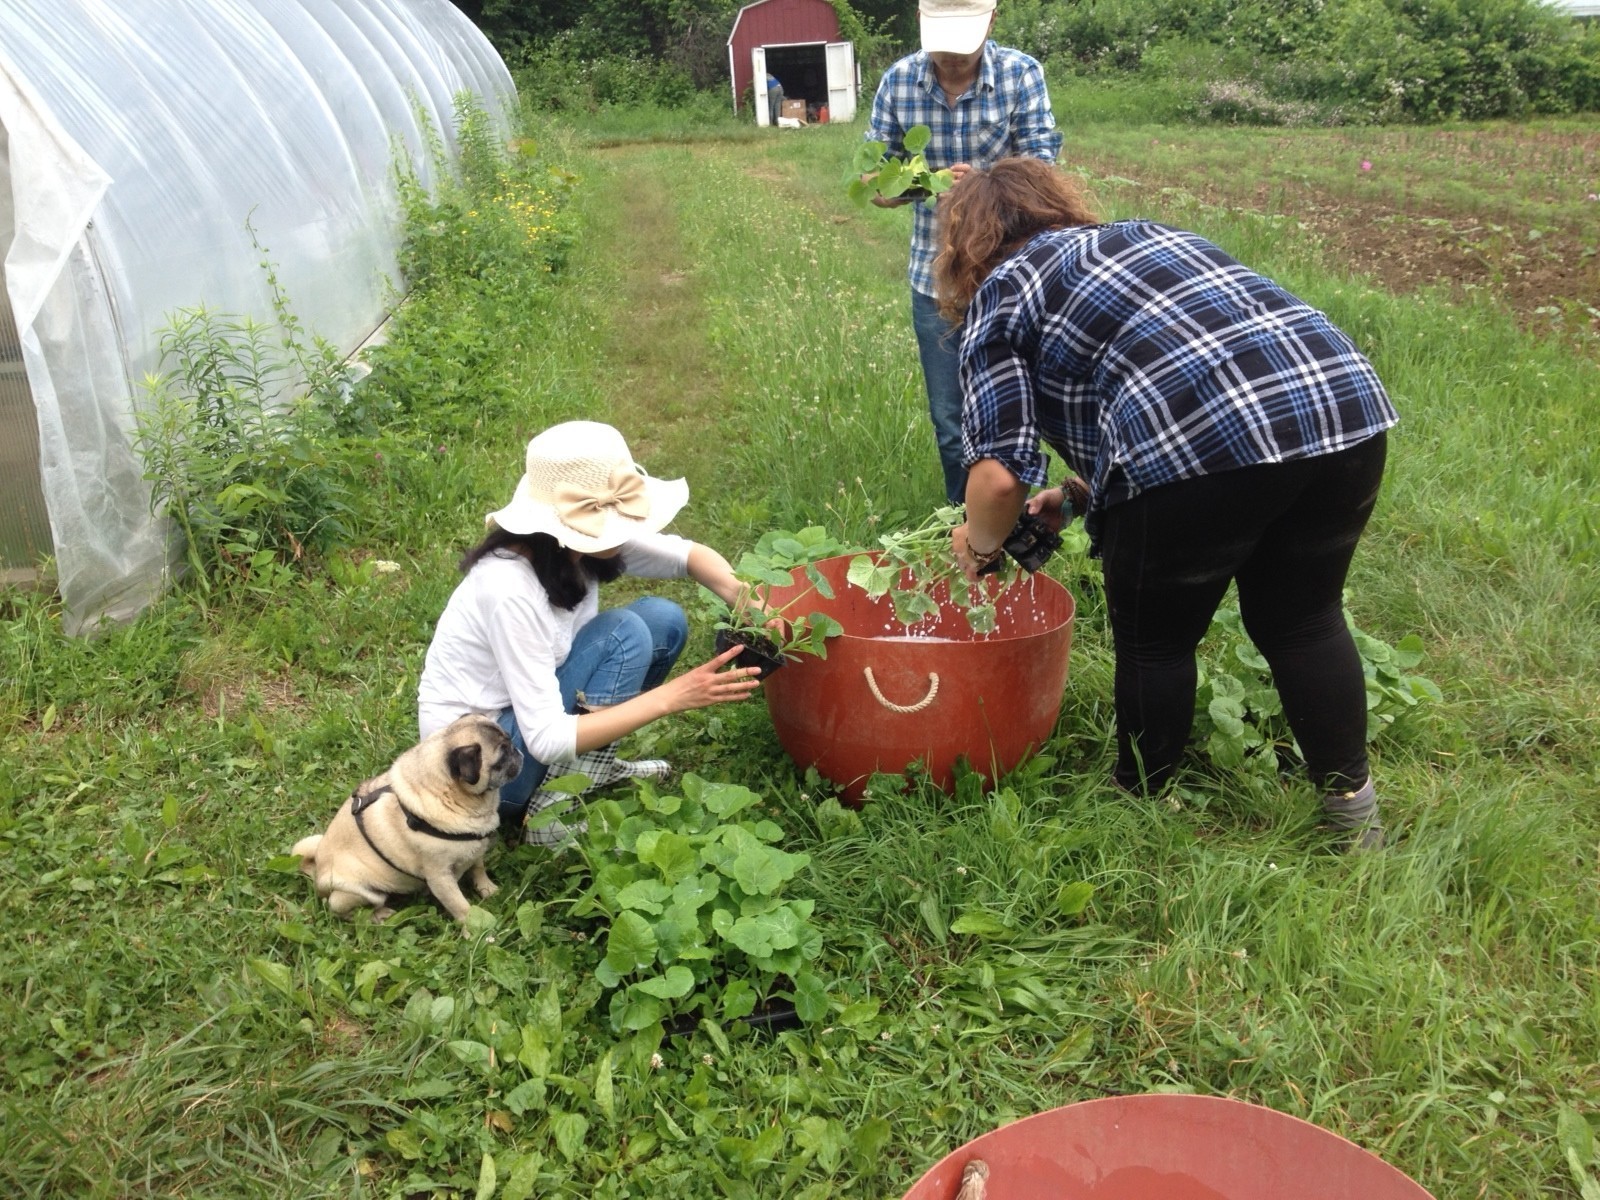 Food, Farm, and Sustainability students dipping squash plants in Organic Kaolin Clay to protect them from pests.